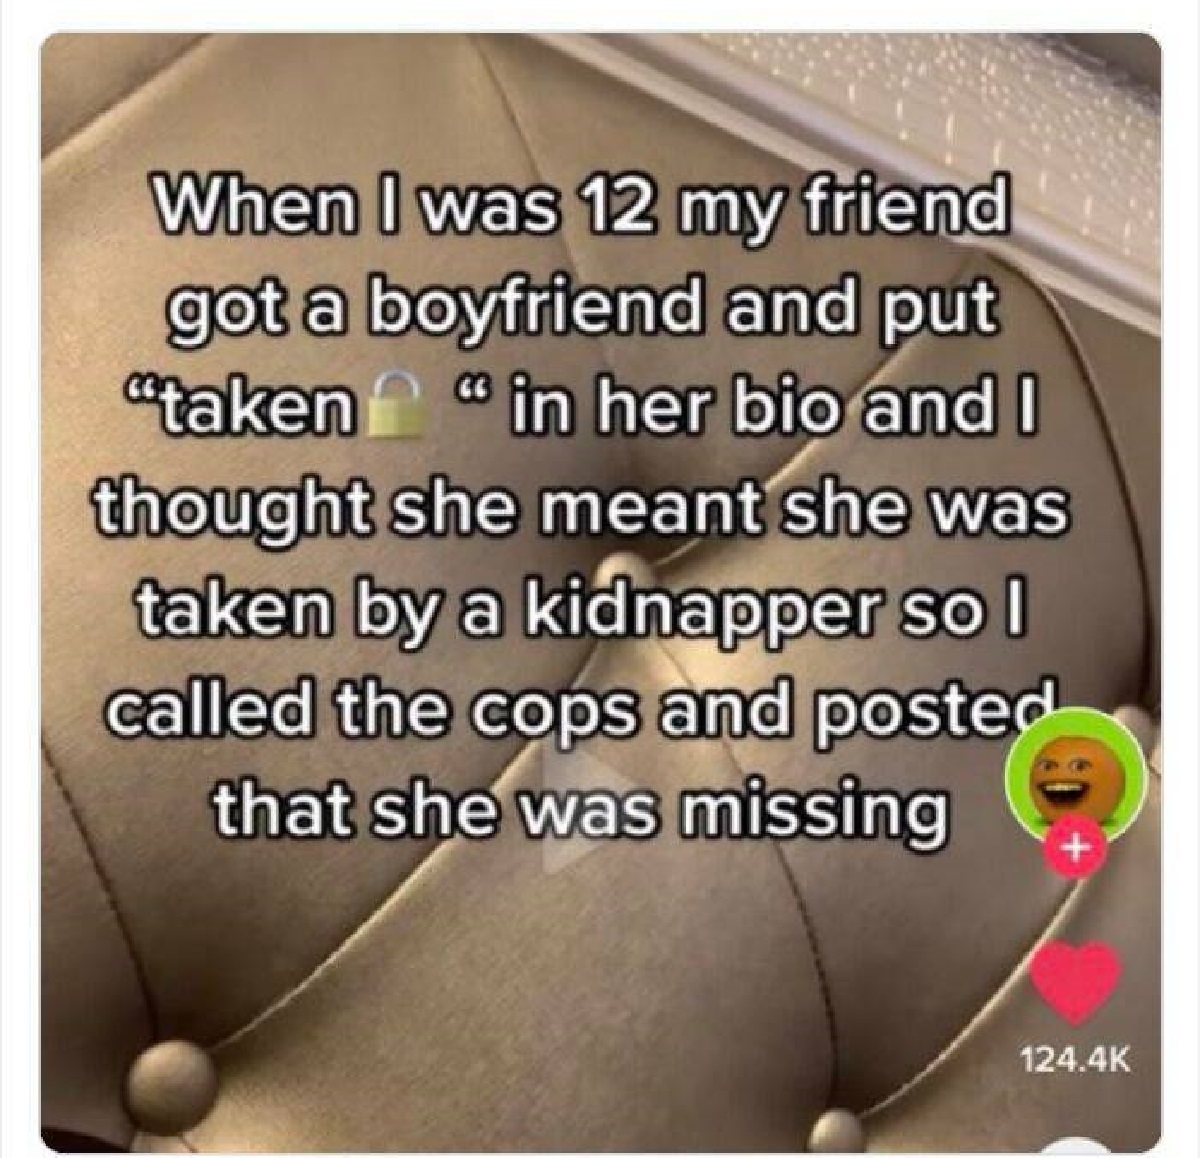 screenshot - When I was 12 my friend got a boyfriend and put "taken" in her bio and I thought she meant she was taken by a kidnapper so I called the cops and posted that she was missing